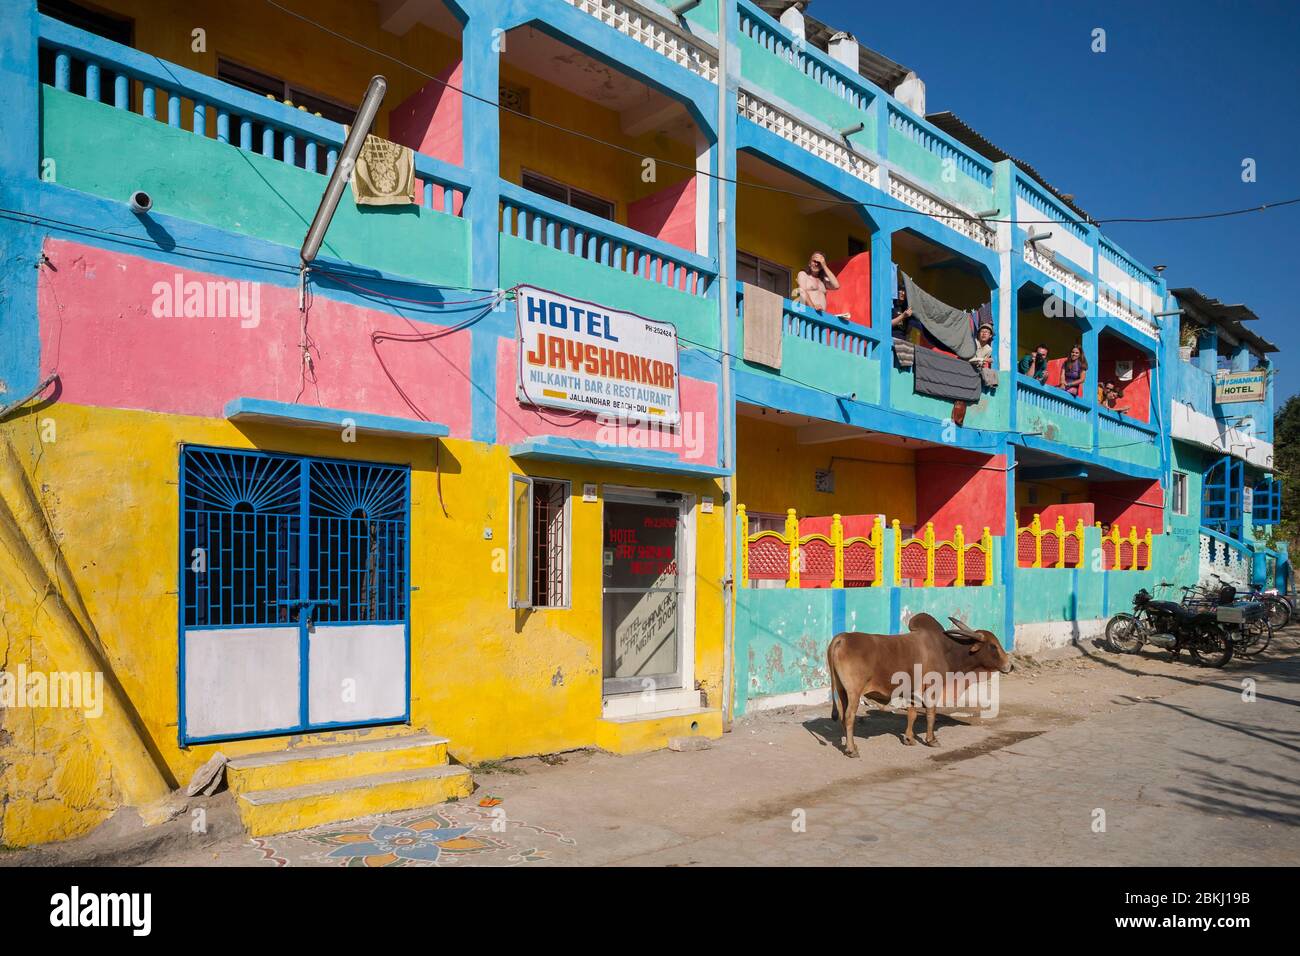 India, Daman and Diu Territory, Diu District, backpacker tourist hotel Jayshankar, colorful facade and tourists observing a sacred cow from their balcony Stock Photo